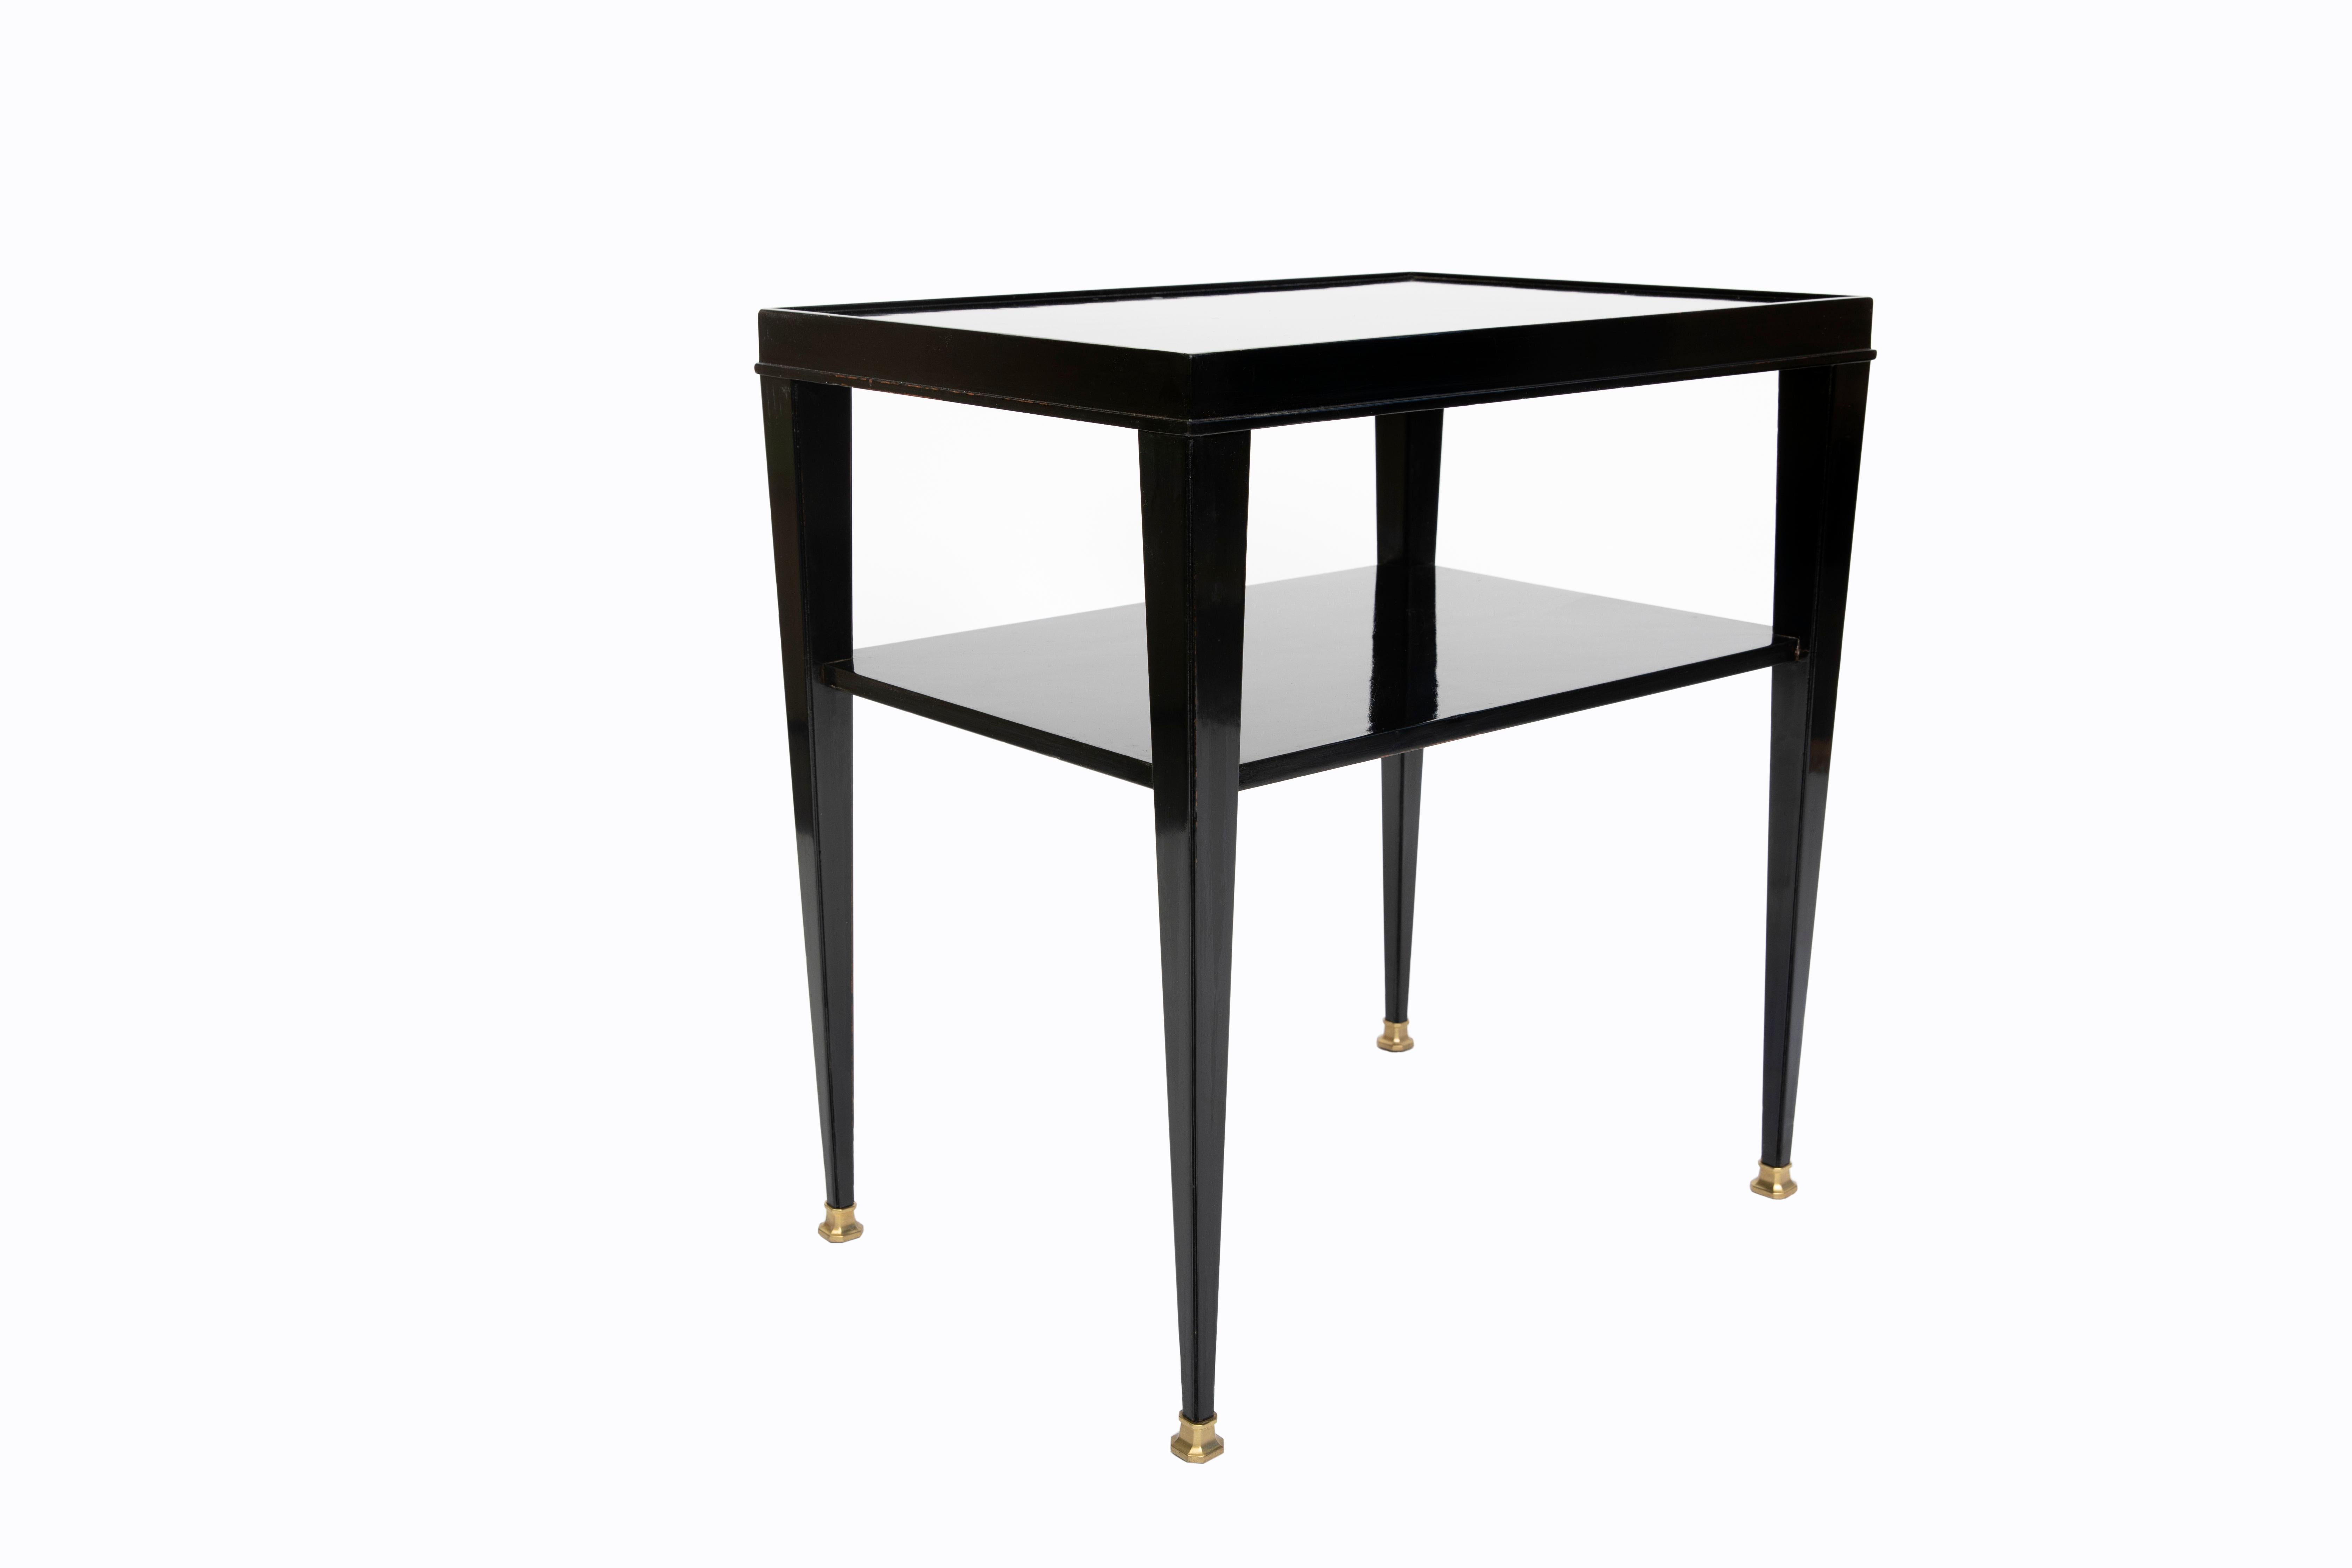 Wood and bronze side table by Comte, Argentina, Buenos Aires, circa 1950.